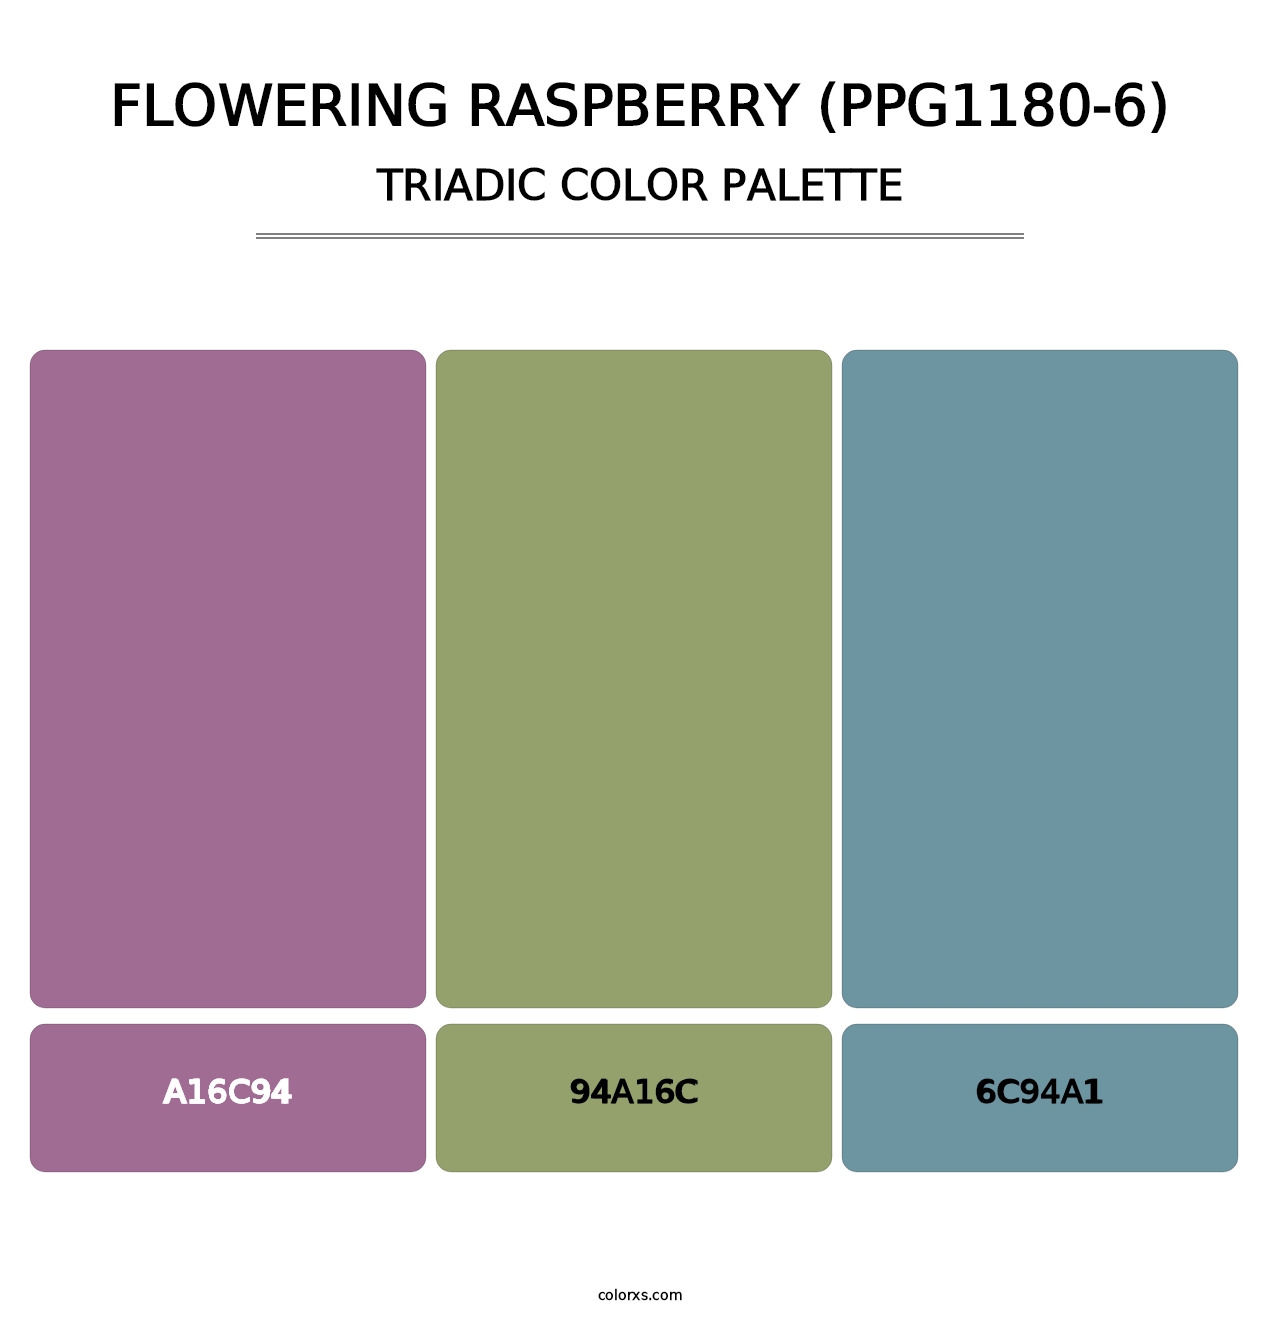 Flowering Raspberry (PPG1180-6) - Triadic Color Palette